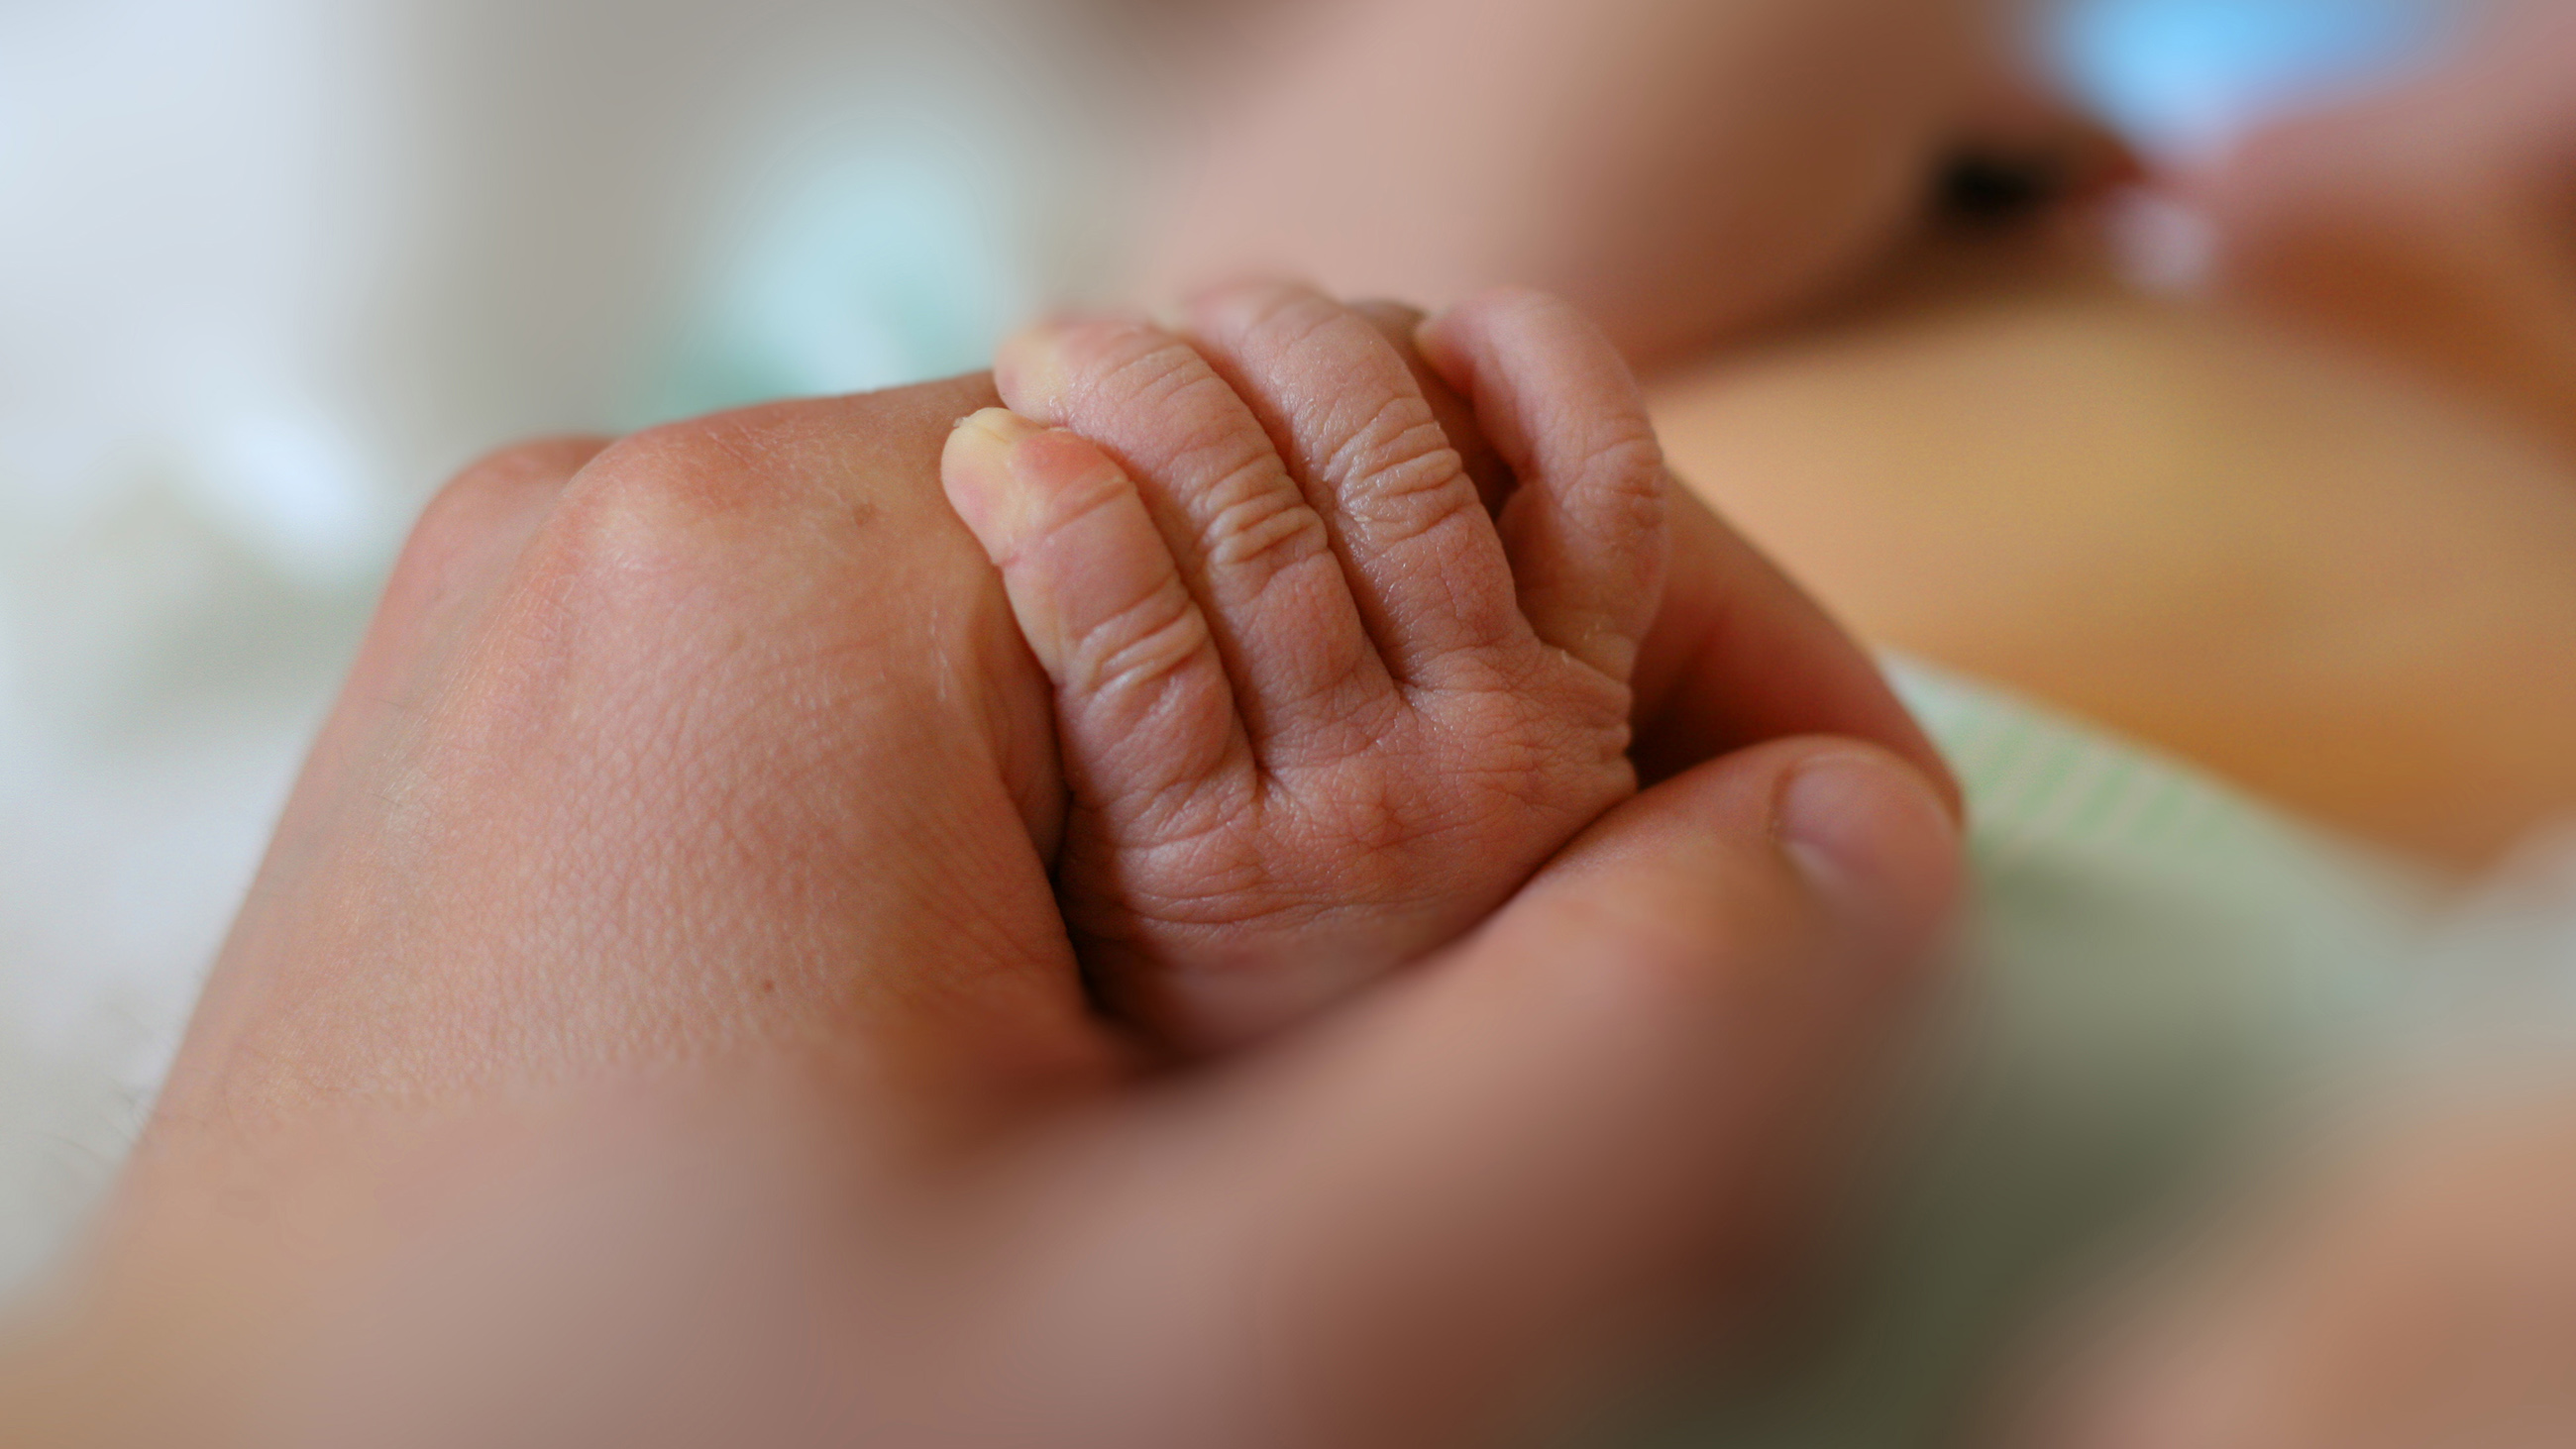 Newborn little hand hold by adult hand